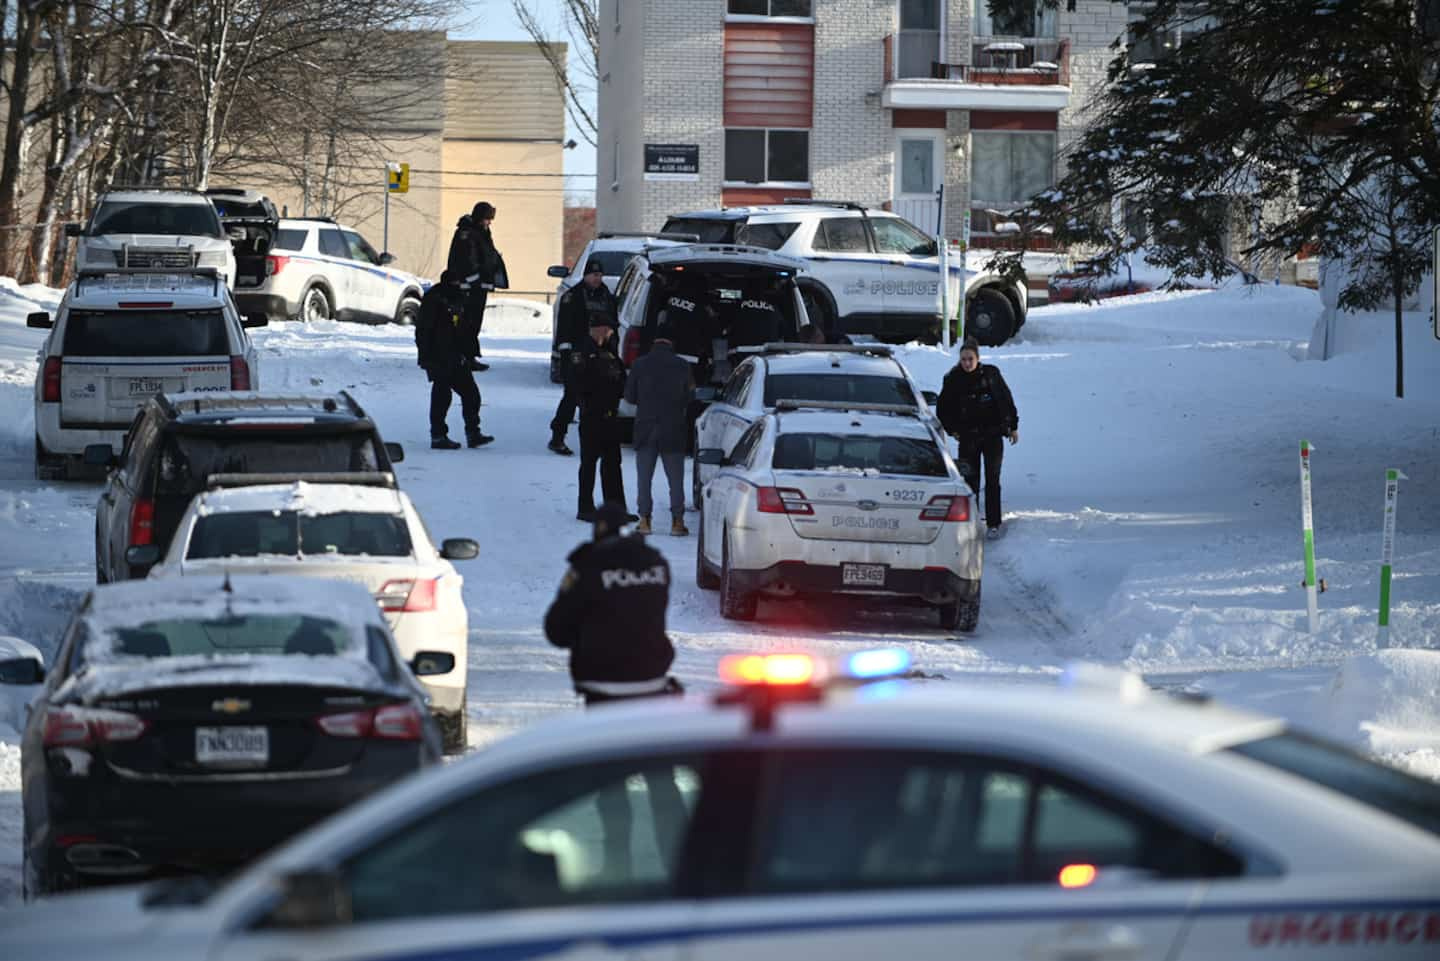 [PHOTOS] Suspects wanted after an armed attack in Quebec